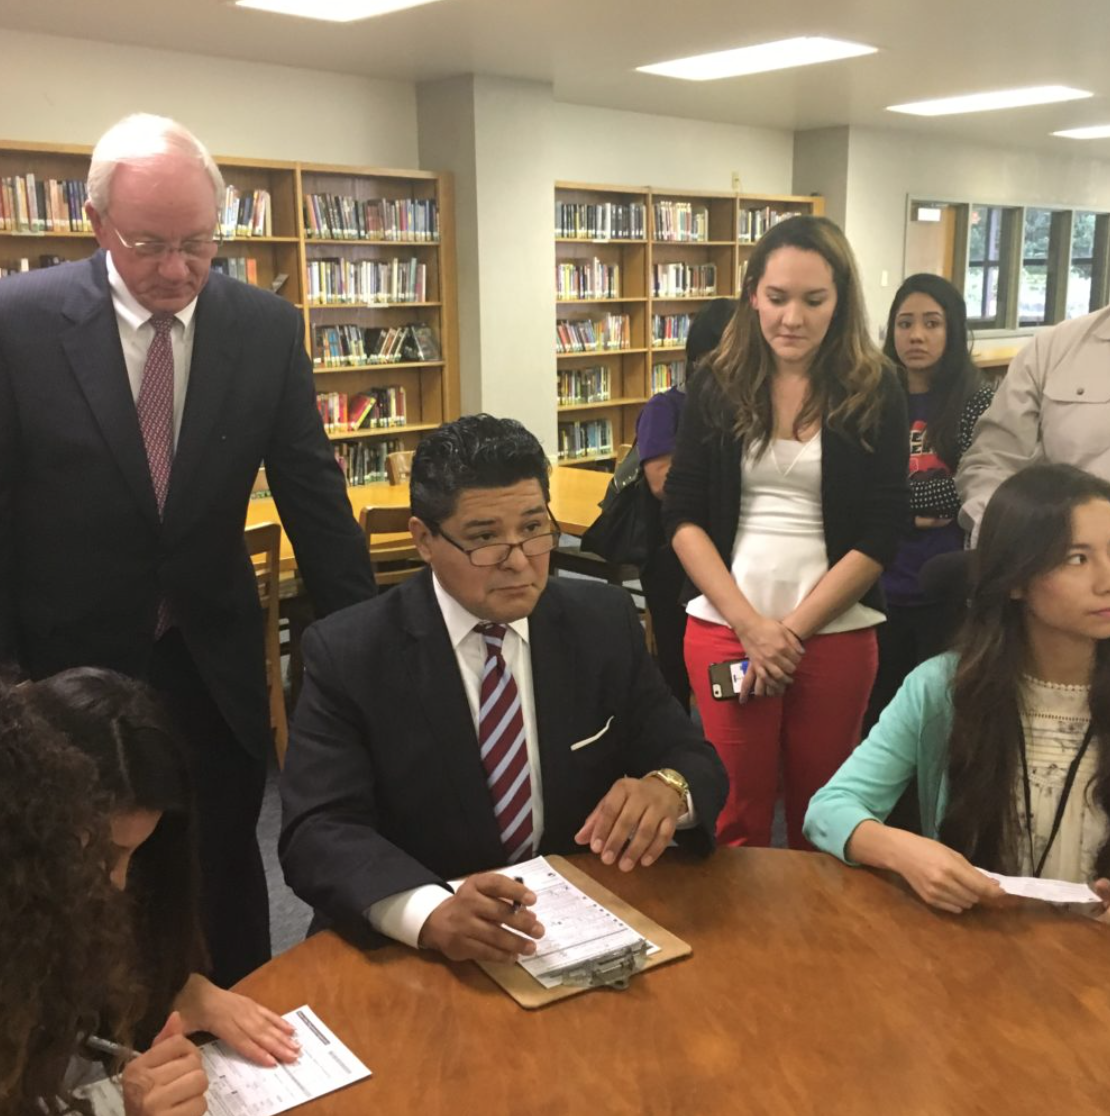 Richard Carranza, Houston ISD Superintendent, a recent arrival from California, registers as a Texas voter alongside students at Sam Houston Math, Science, and Technology Center. Mike Sullivan, Harris County Tax Assessor-Collector, looks on.